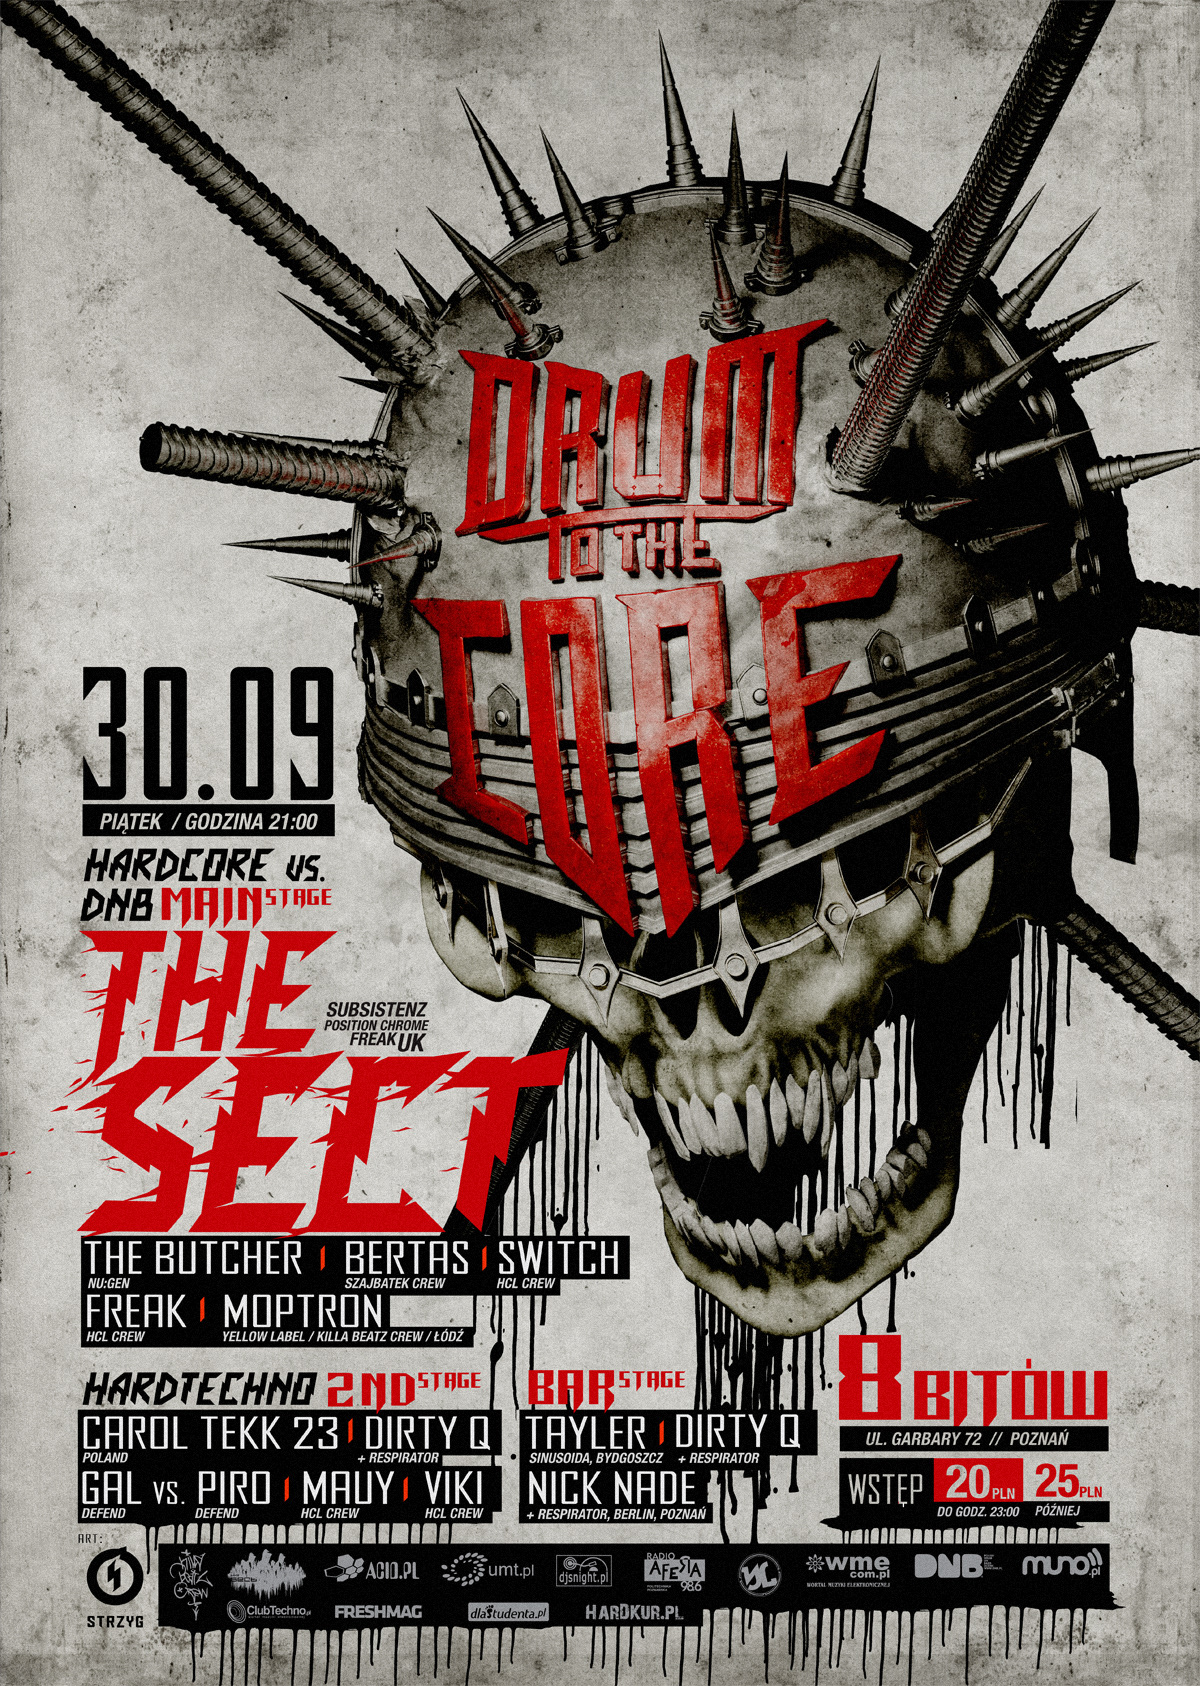 poster flyer DnB Drum and Bass Hardcore the sect  poznan strzyg music event tarpaulin skull print graphic typography  